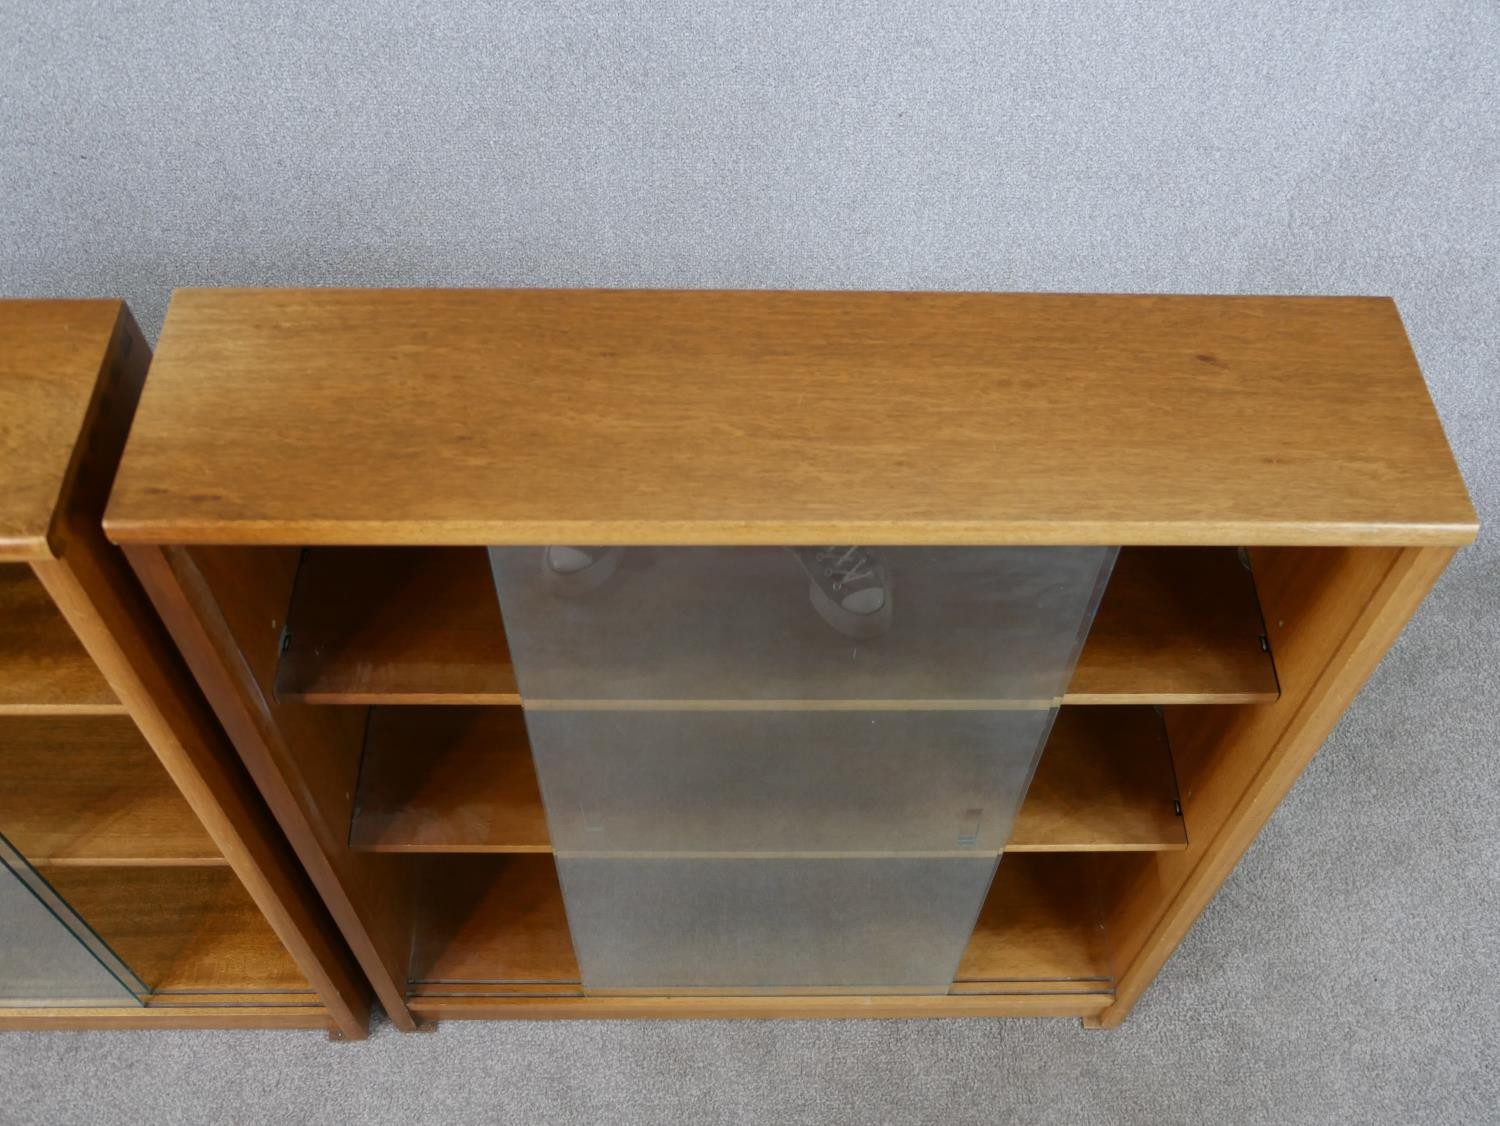 A pair of circa 1970s Jonell bookcases, with a pair of glass sliding doors enclosing shelves, on a - Image 5 of 8